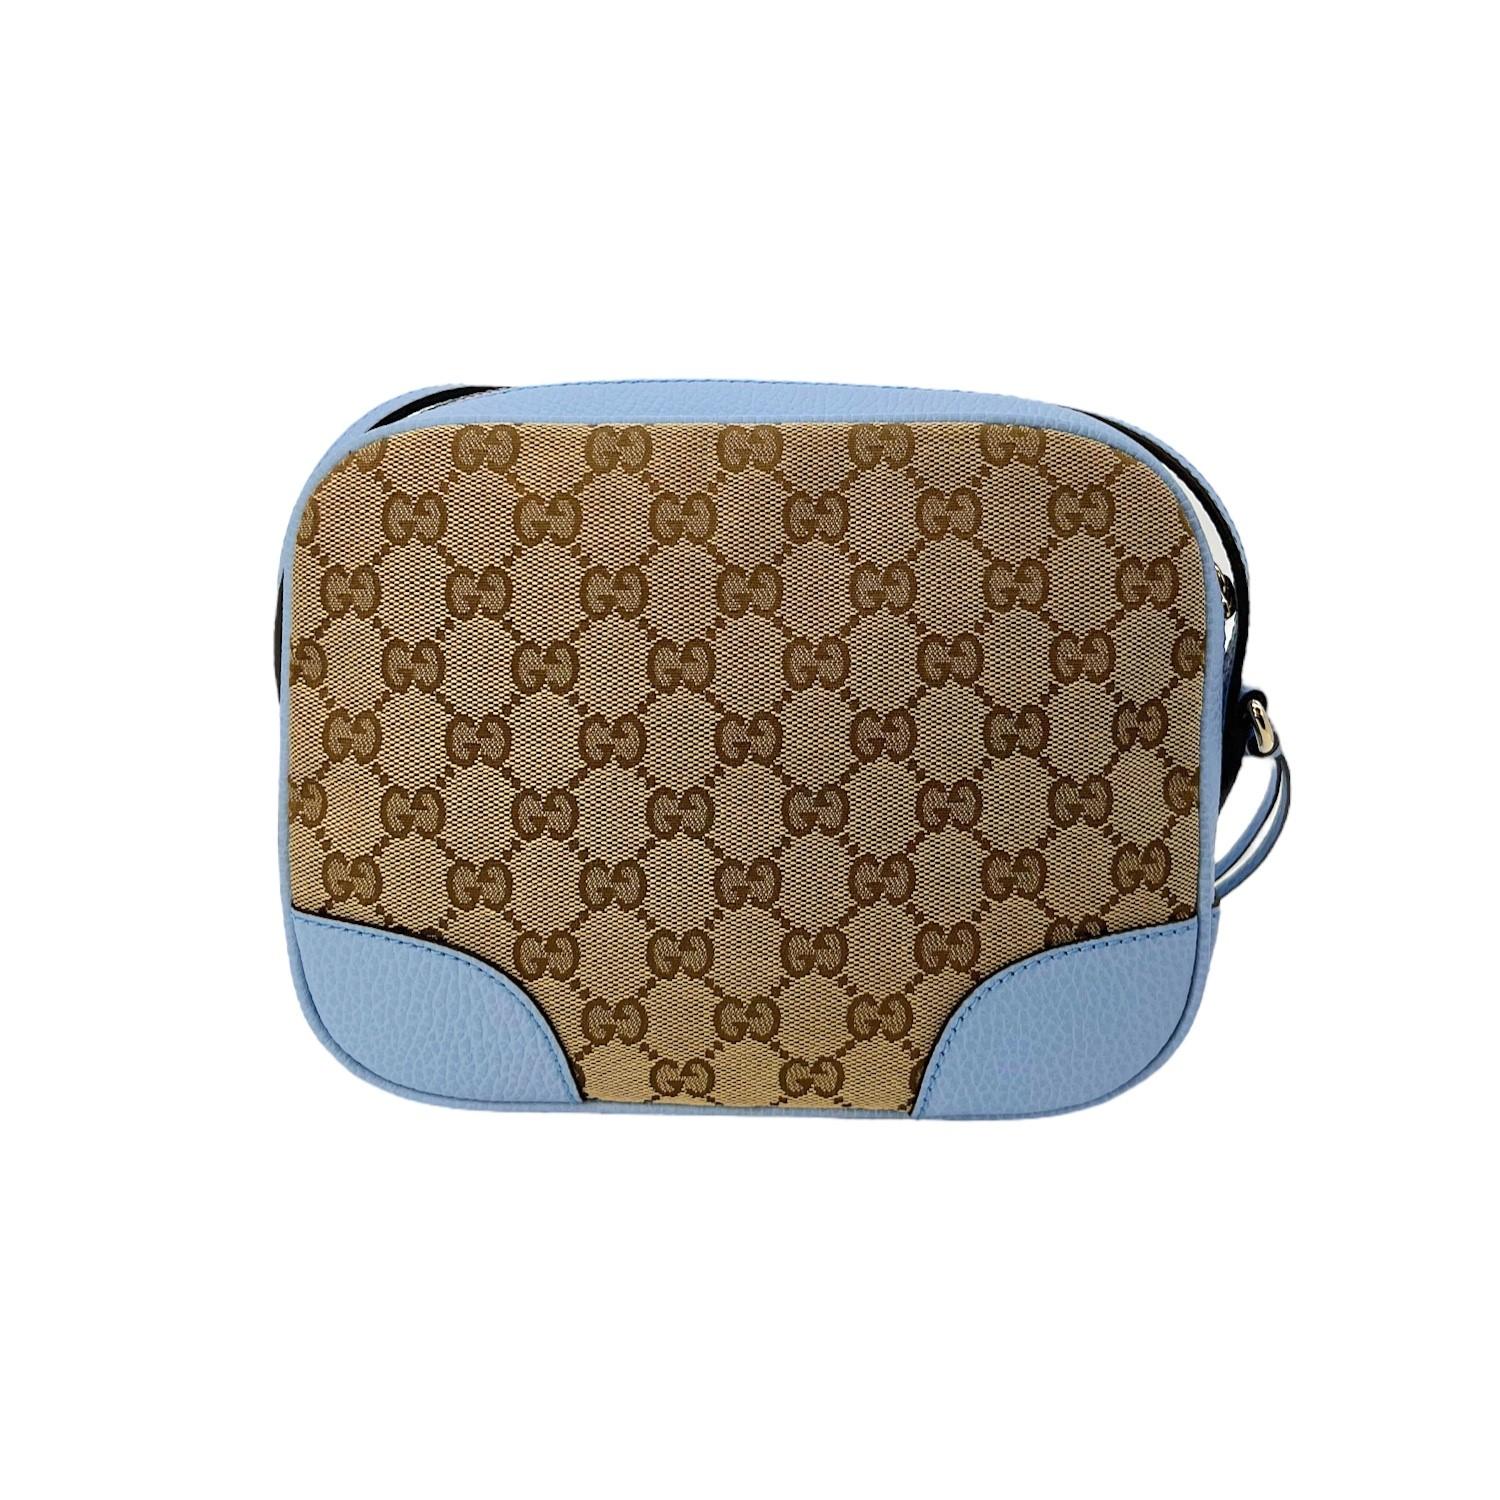 This Gucci GG Canvas Mini Bree Crossbody Bag was made in Italy and it is finely crafted of the classic Gucci GG canvas exterior with leather trimming and gold-tone hardware features. It has a flat leather adjustable shoulder strap. It has a zipper